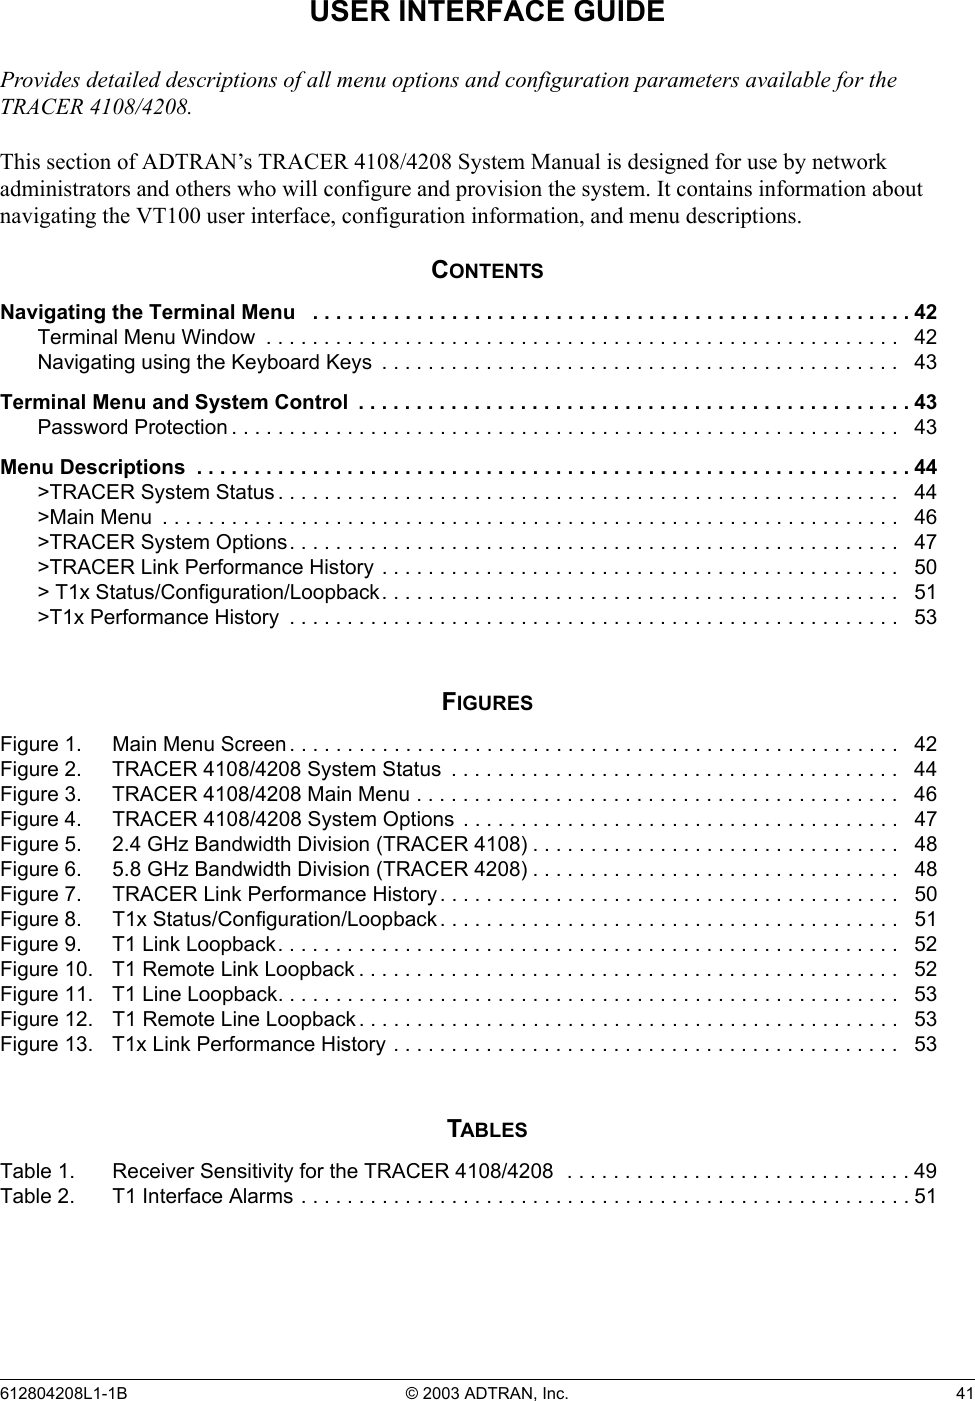 612804208L1-1B © 2003 ADTRAN, Inc.  41USER INTERFACE GUIDEProvides detailed descriptions of all menu options and configuration parameters available for the TRACER 4108/4208.This section of ADTRAN’s TRACER 4108/4208 System Manual is designed for use by network administrators and others who will configure and provision the system. It contains information about navigating the VT100 user interface, configuration information, and menu descriptions.CONTENTSNavigating the Terminal Menu   . . . . . . . . . . . . . . . . . . . . . . . . . . . . . . . . . . . . . . . . . . . . . . . . . . . . 42Terminal Menu Window  . . . . . . . . . . . . . . . . . . . . . . . . . . . . . . . . . . . . . . . . . . . . . . . . . . . . . . .   42Navigating using the Keyboard Keys  . . . . . . . . . . . . . . . . . . . . . . . . . . . . . . . . . . . . . . . . . . . . .   43Terminal Menu and System Control  . . . . . . . . . . . . . . . . . . . . . . . . . . . . . . . . . . . . . . . . . . . . . . . .43Password Protection . . . . . . . . . . . . . . . . . . . . . . . . . . . . . . . . . . . . . . . . . . . . . . . . . . . . . . . . . .   43Menu Descriptions  . . . . . . . . . . . . . . . . . . . . . . . . . . . . . . . . . . . . . . . . . . . . . . . . . . . . . . . . . . . . . . 44&gt;TRACER System Status . . . . . . . . . . . . . . . . . . . . . . . . . . . . . . . . . . . . . . . . . . . . . . . . . . . . . .  44&gt;Main Menu  . . . . . . . . . . . . . . . . . . . . . . . . . . . . . . . . . . . . . . . . . . . . . . . . . . . . . . . . . . . . . . . .   46&gt;TRACER System Options. . . . . . . . . . . . . . . . . . . . . . . . . . . . . . . . . . . . . . . . . . . . . . . . . . . . .  47&gt;TRACER Link Performance History . . . . . . . . . . . . . . . . . . . . . . . . . . . . . . . . . . . . . . . . . . . . .   50&gt; T1x Status/Configuration/Loopback. . . . . . . . . . . . . . . . . . . . . . . . . . . . . . . . . . . . . . . . . . . . .   51&gt;T1x Performance History  . . . . . . . . . . . . . . . . . . . . . . . . . . . . . . . . . . . . . . . . . . . . . . . . . . . . .   53FIGURESFigure 1. Main Menu Screen. . . . . . . . . . . . . . . . . . . . . . . . . . . . . . . . . . . . . . . . . . . . . . . . . . . . .   42Figure 2. TRACER 4108/4208 System Status  . . . . . . . . . . . . . . . . . . . . . . . . . . . . . . . . . . . . . . .   44Figure 3. TRACER 4108/4208 Main Menu . . . . . . . . . . . . . . . . . . . . . . . . . . . . . . . . . . . . . . . . . .   46Figure 4. TRACER 4108/4208 System Options  . . . . . . . . . . . . . . . . . . . . . . . . . . . . . . . . . . . . . .   47Figure 5. 2.4 GHz Bandwidth Division (TRACER 4108) . . . . . . . . . . . . . . . . . . . . . . . . . . . . . . . .   48Figure 6. 5.8 GHz Bandwidth Division (TRACER 4208) . . . . . . . . . . . . . . . . . . . . . . . . . . . . . . . .   48Figure 7. TRACER Link Performance History . . . . . . . . . . . . . . . . . . . . . . . . . . . . . . . . . . . . . . . .   50Figure 8. T1x Status/Configuration/Loopback . . . . . . . . . . . . . . . . . . . . . . . . . . . . . . . . . . . . . . . .   51Figure 9. T1 Link Loopback. . . . . . . . . . . . . . . . . . . . . . . . . . . . . . . . . . . . . . . . . . . . . . . . . . . . . .   52Figure 10. T1 Remote Link Loopback . . . . . . . . . . . . . . . . . . . . . . . . . . . . . . . . . . . . . . . . . . . . . . .   52Figure 11. T1 Line Loopback. . . . . . . . . . . . . . . . . . . . . . . . . . . . . . . . . . . . . . . . . . . . . . . . . . . . . .   53Figure 12. T1 Remote Line Loopback . . . . . . . . . . . . . . . . . . . . . . . . . . . . . . . . . . . . . . . . . . . . . . .   53Figure 13. T1x Link Performance History . . . . . . . . . . . . . . . . . . . . . . . . . . . . . . . . . . . . . . . . . . . .   53TABLESTable 1. Receiver Sensitivity for the TRACER 4108/4208  . . . . . . . . . . . . . . . . . . . . . . . . . . . . . . 49Table 2. T1 Interface Alarms . . . . . . . . . . . . . . . . . . . . . . . . . . . . . . . . . . . . . . . . . . . . . . . . . . . . . 51